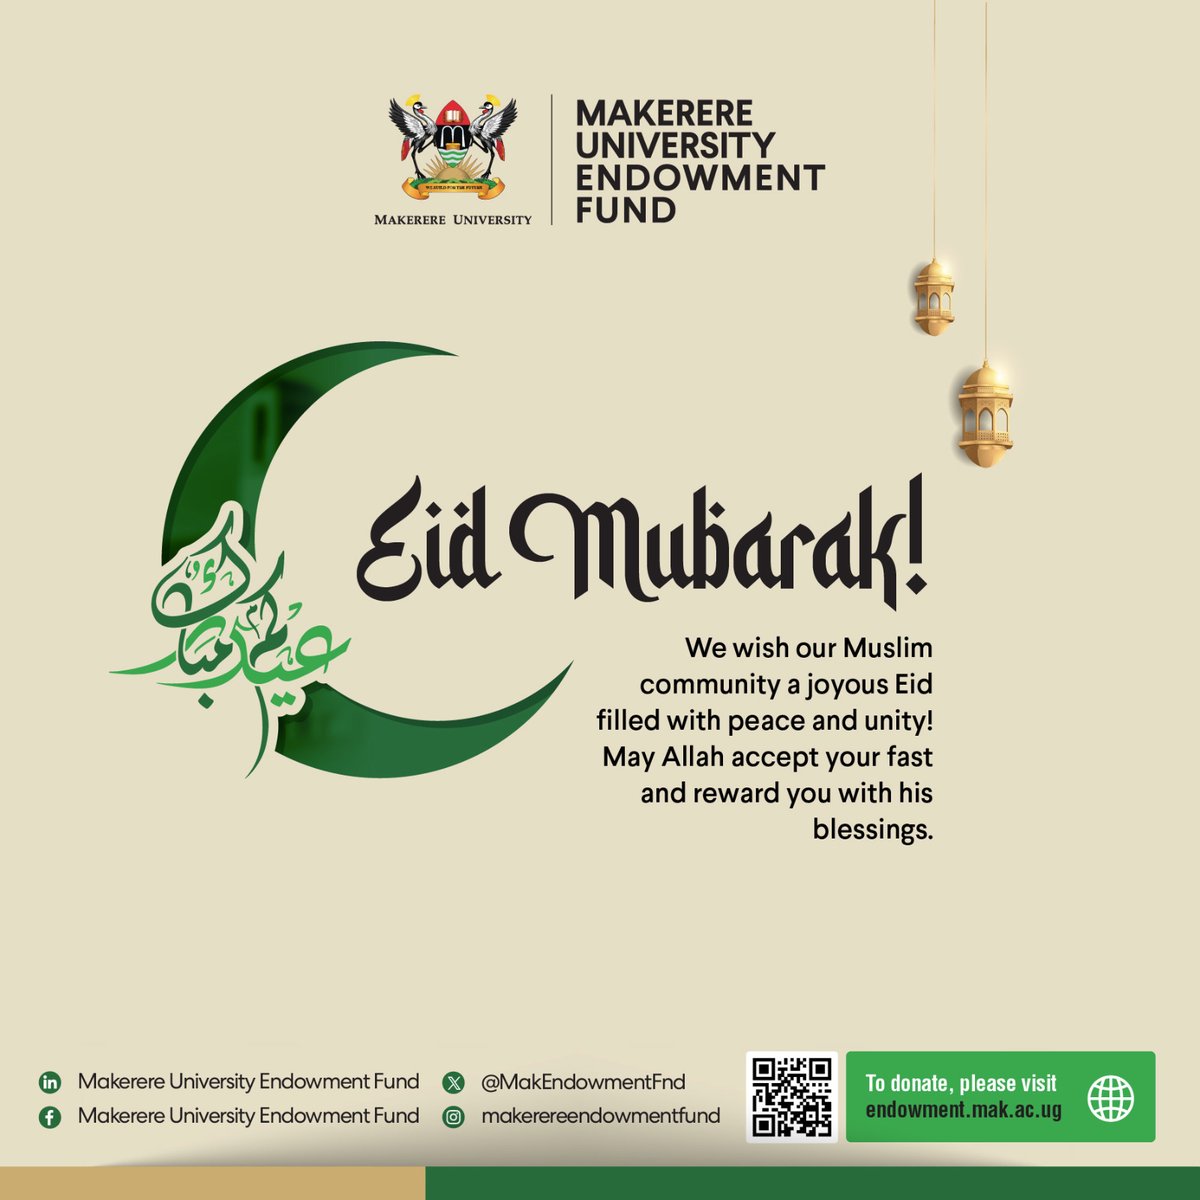 #EidMubarak to all our brothers and sisters of the Islamic faith. We wish you a joyous Eid filled with peace and unity. May Allah accept your fast and reward you with his blessings.